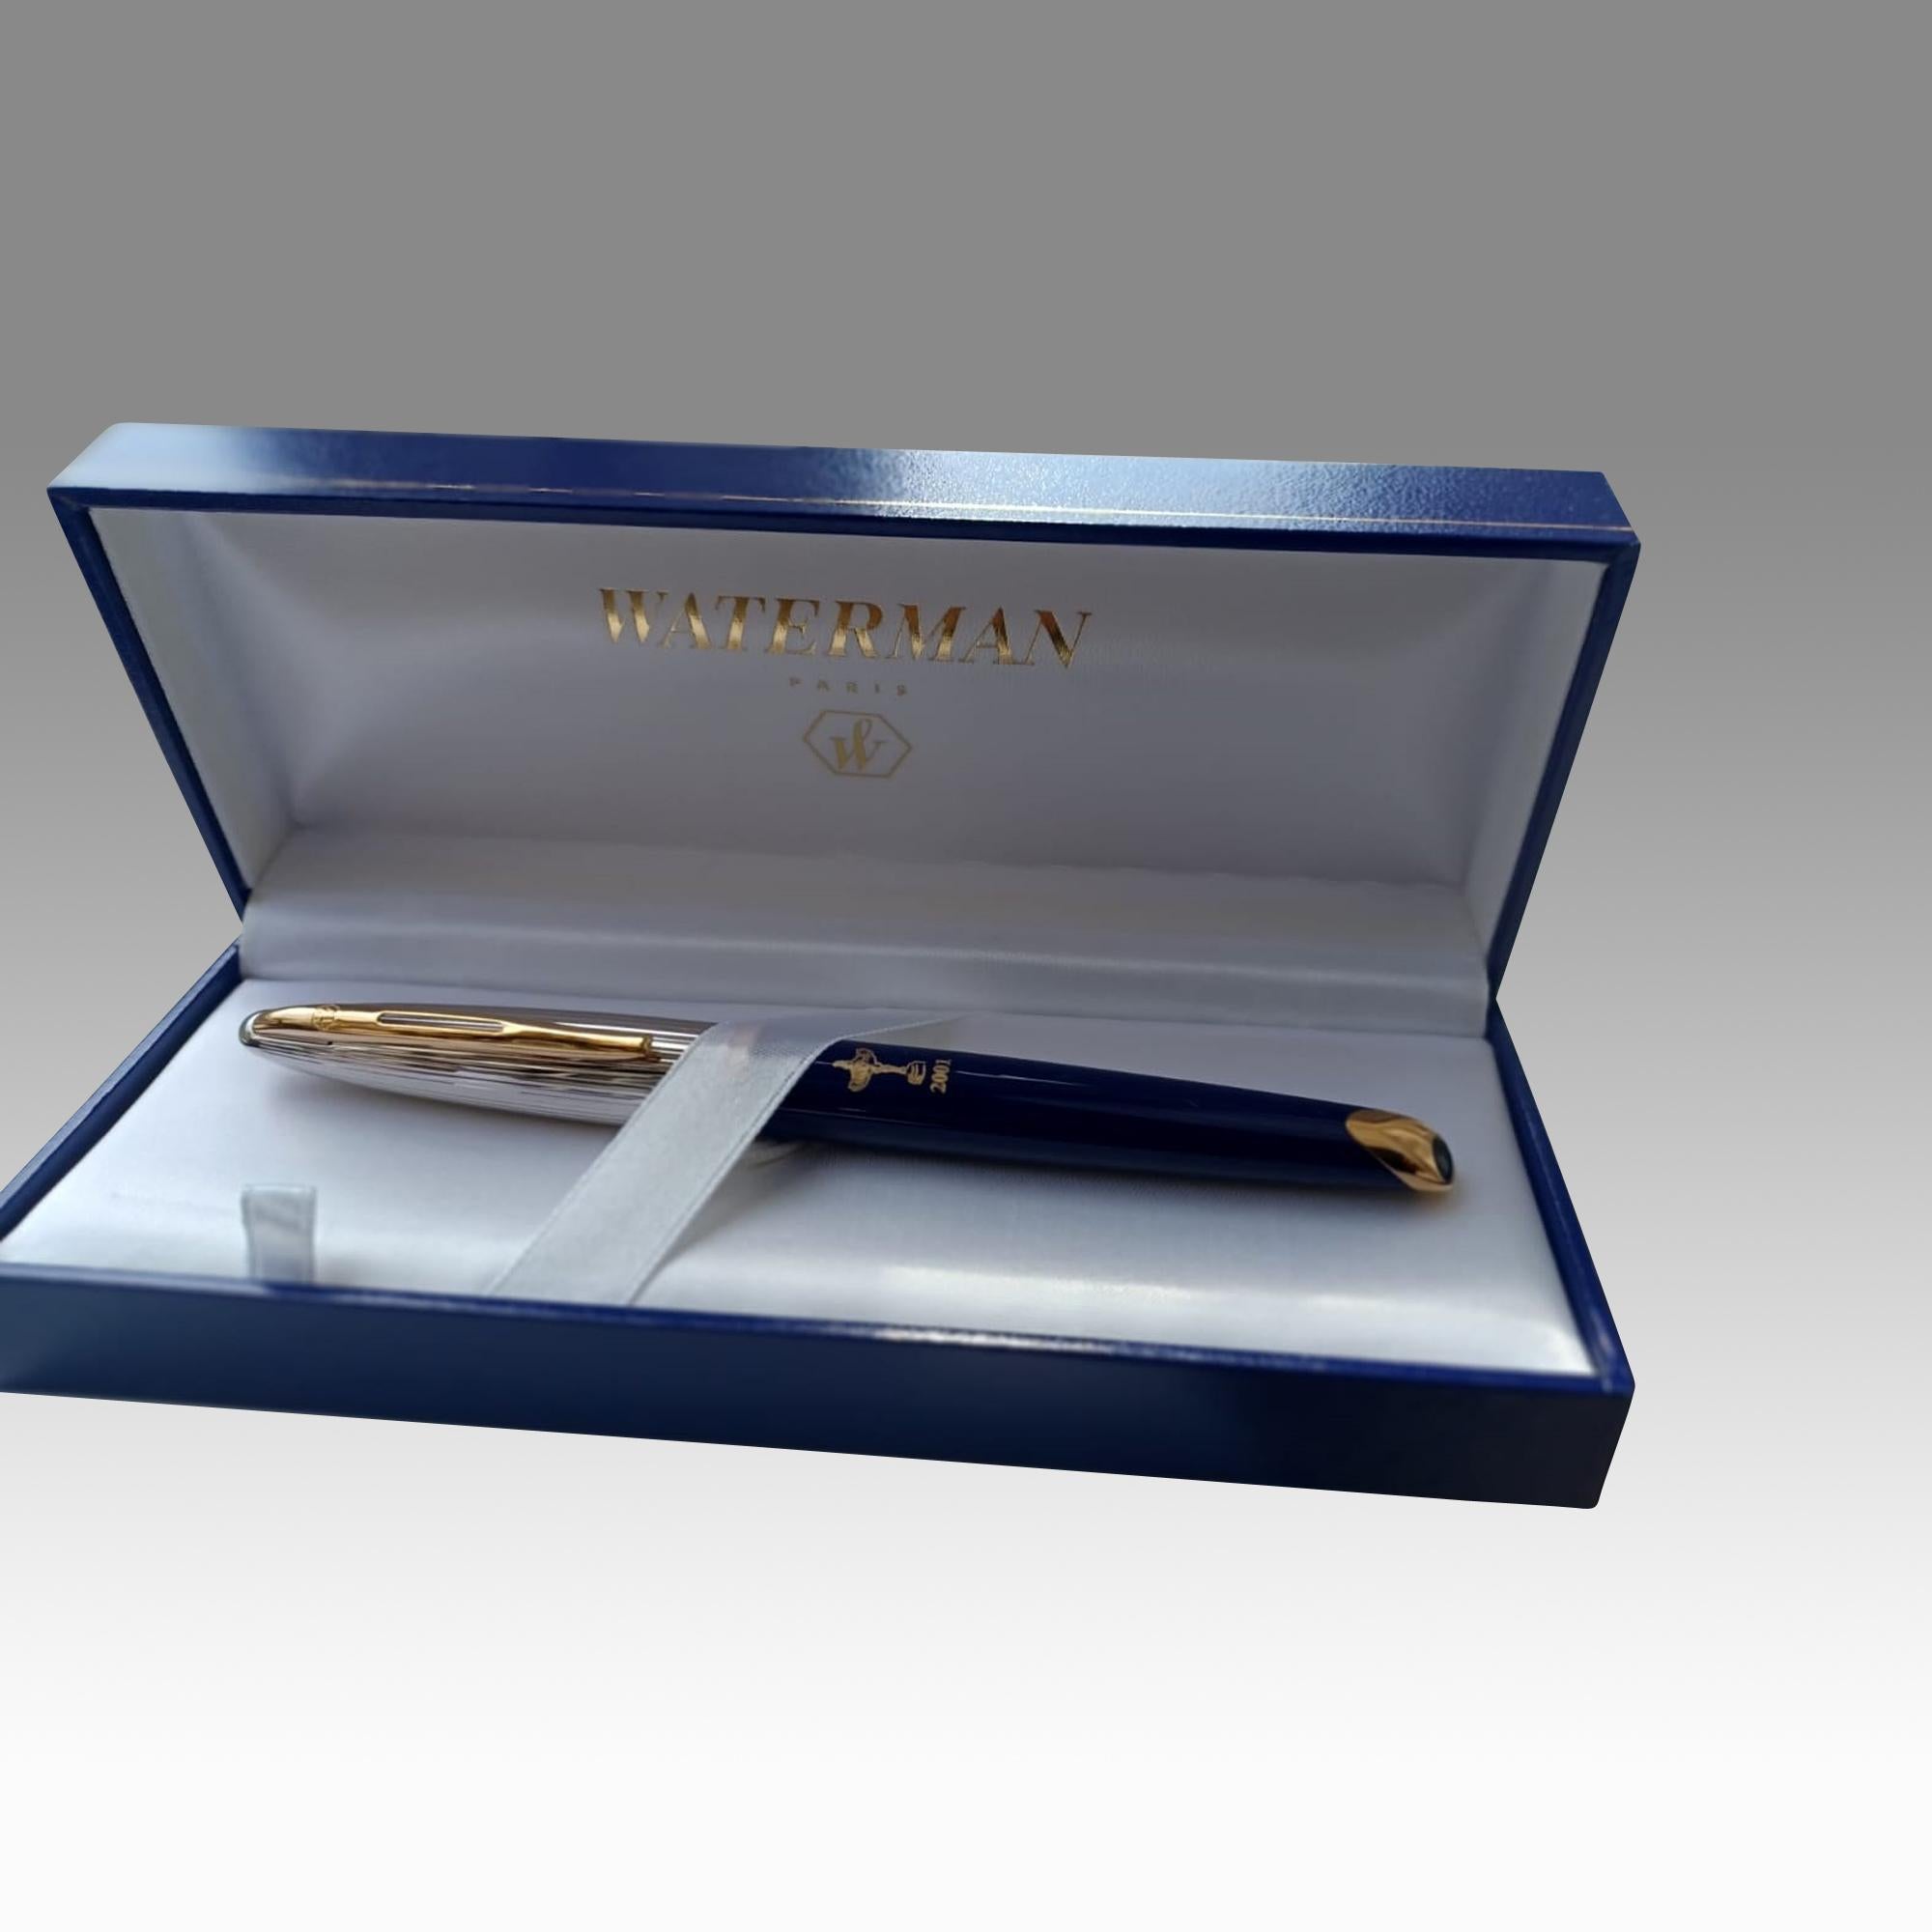 Rare 2001 Postponed Ryder Cup Waterman Ink Fountain Pen with 18K Gold Nib For Sale 4